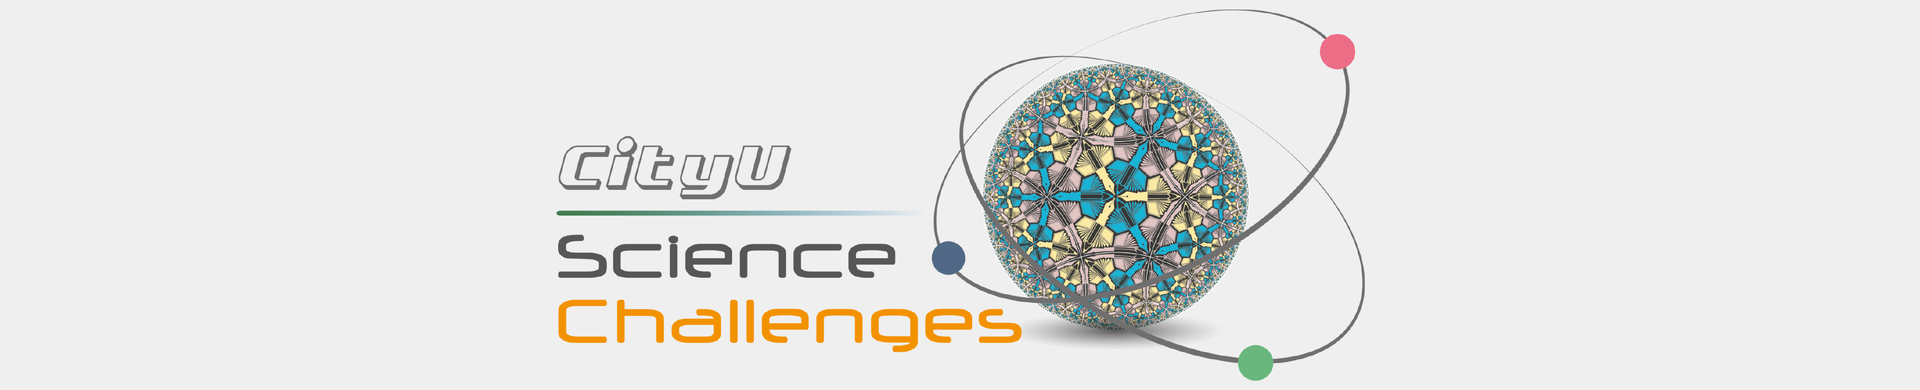 Science Challenges logo